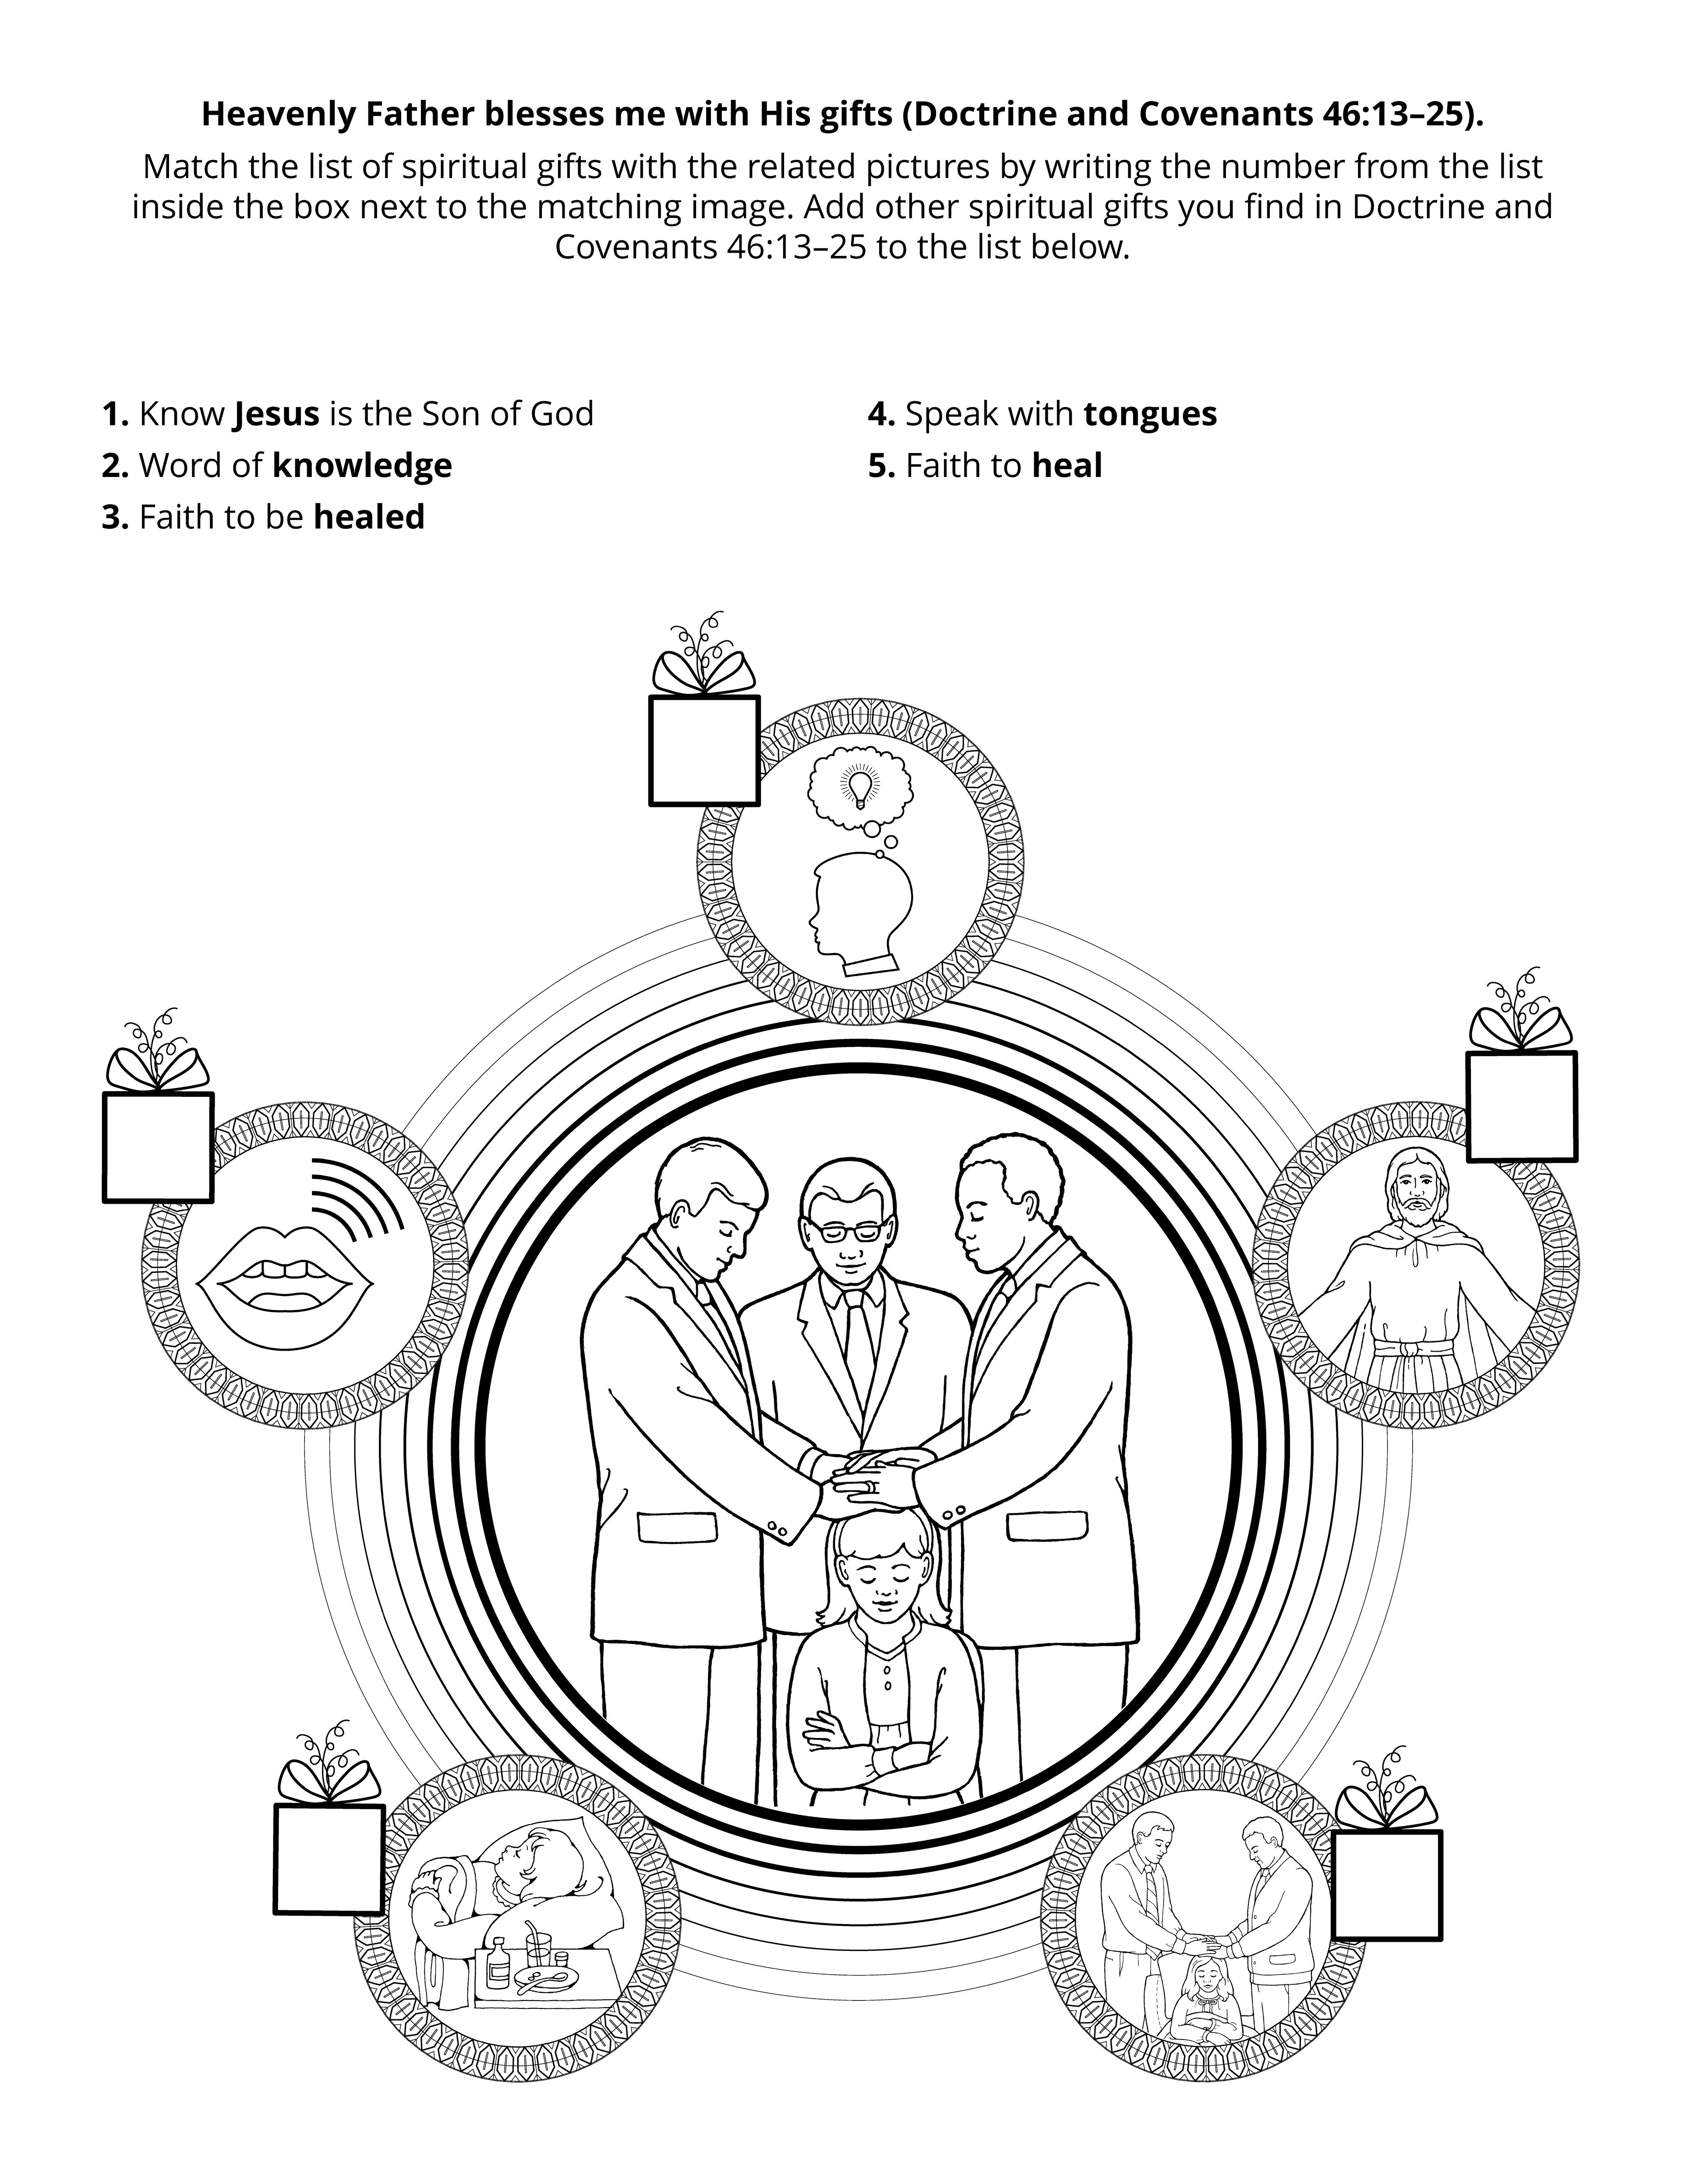 Coloring picture of a priesthood blessing.